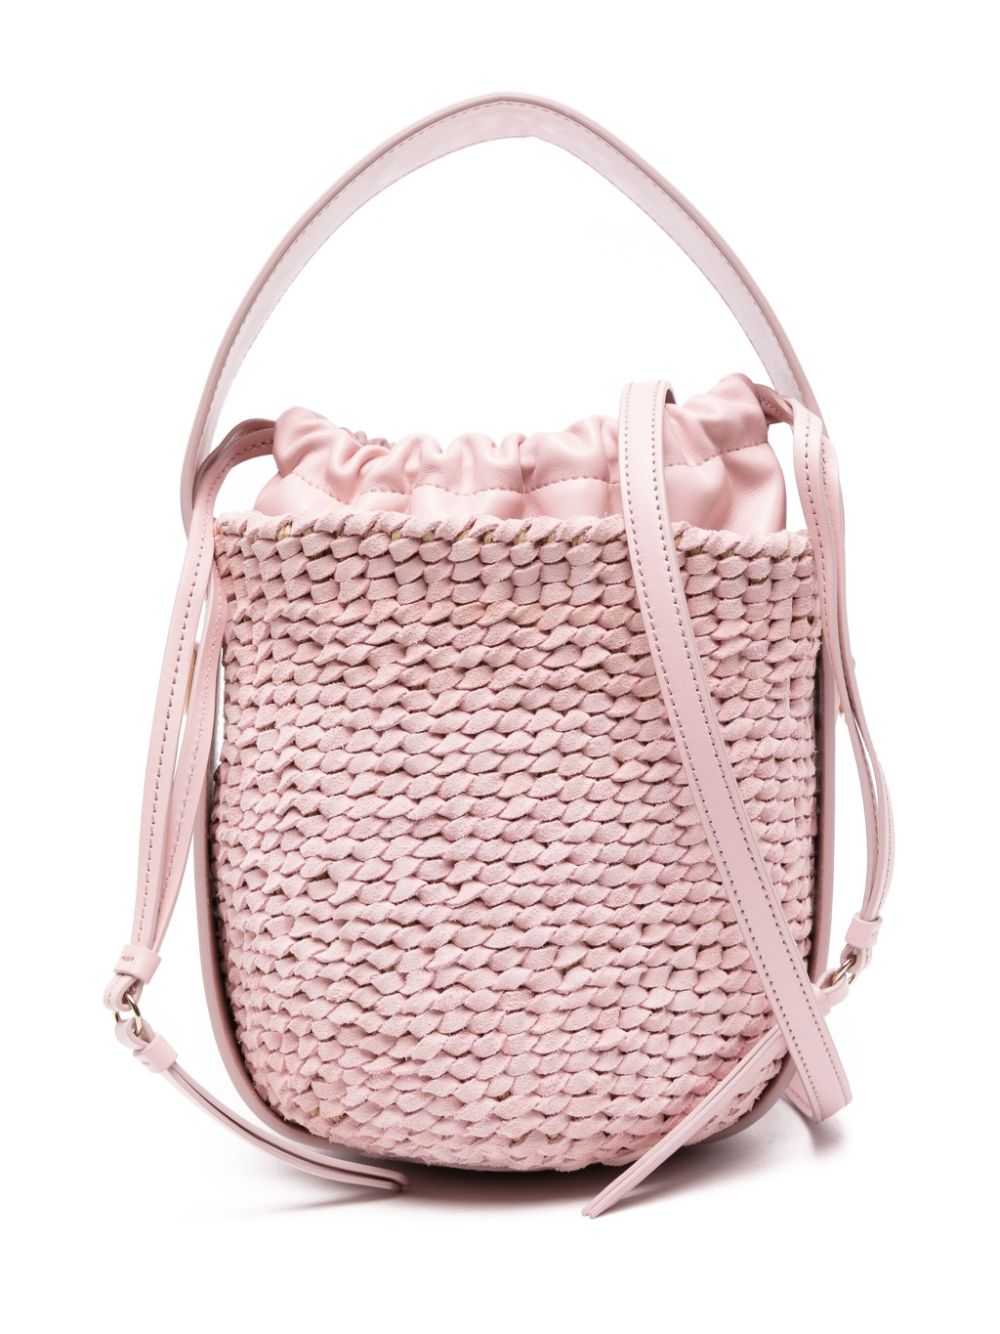 CHLOÉ Chic Pink Lambskin Suede Mini Bucket Bag with Embroidered Handle and Adjustable Strap